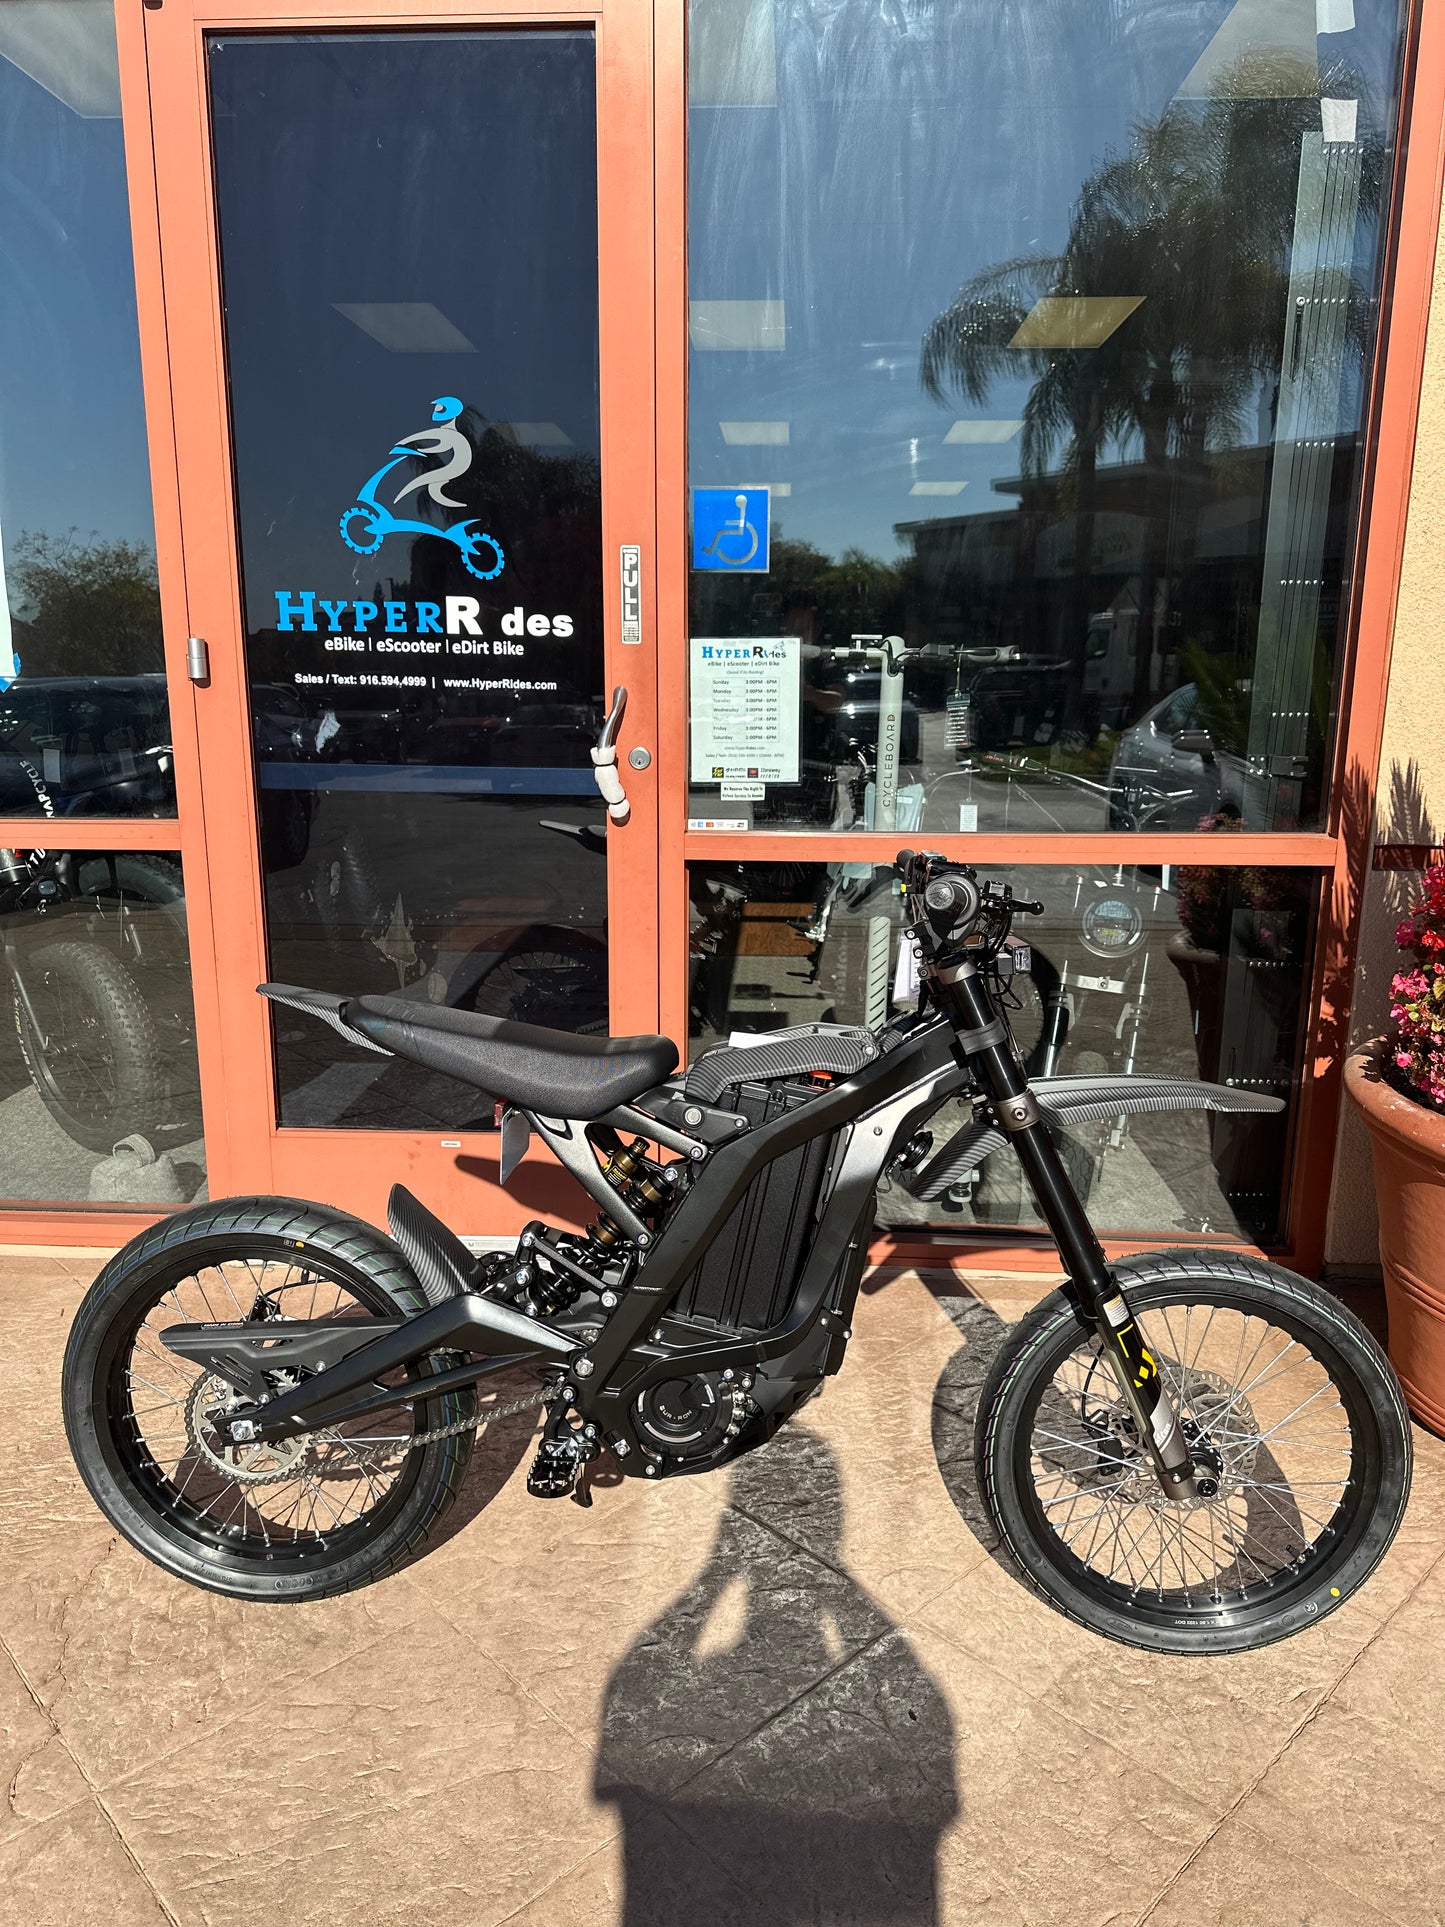 Black Dirt Bike with Carbon Fiber Fenders Surron in front of store Hyper Rides